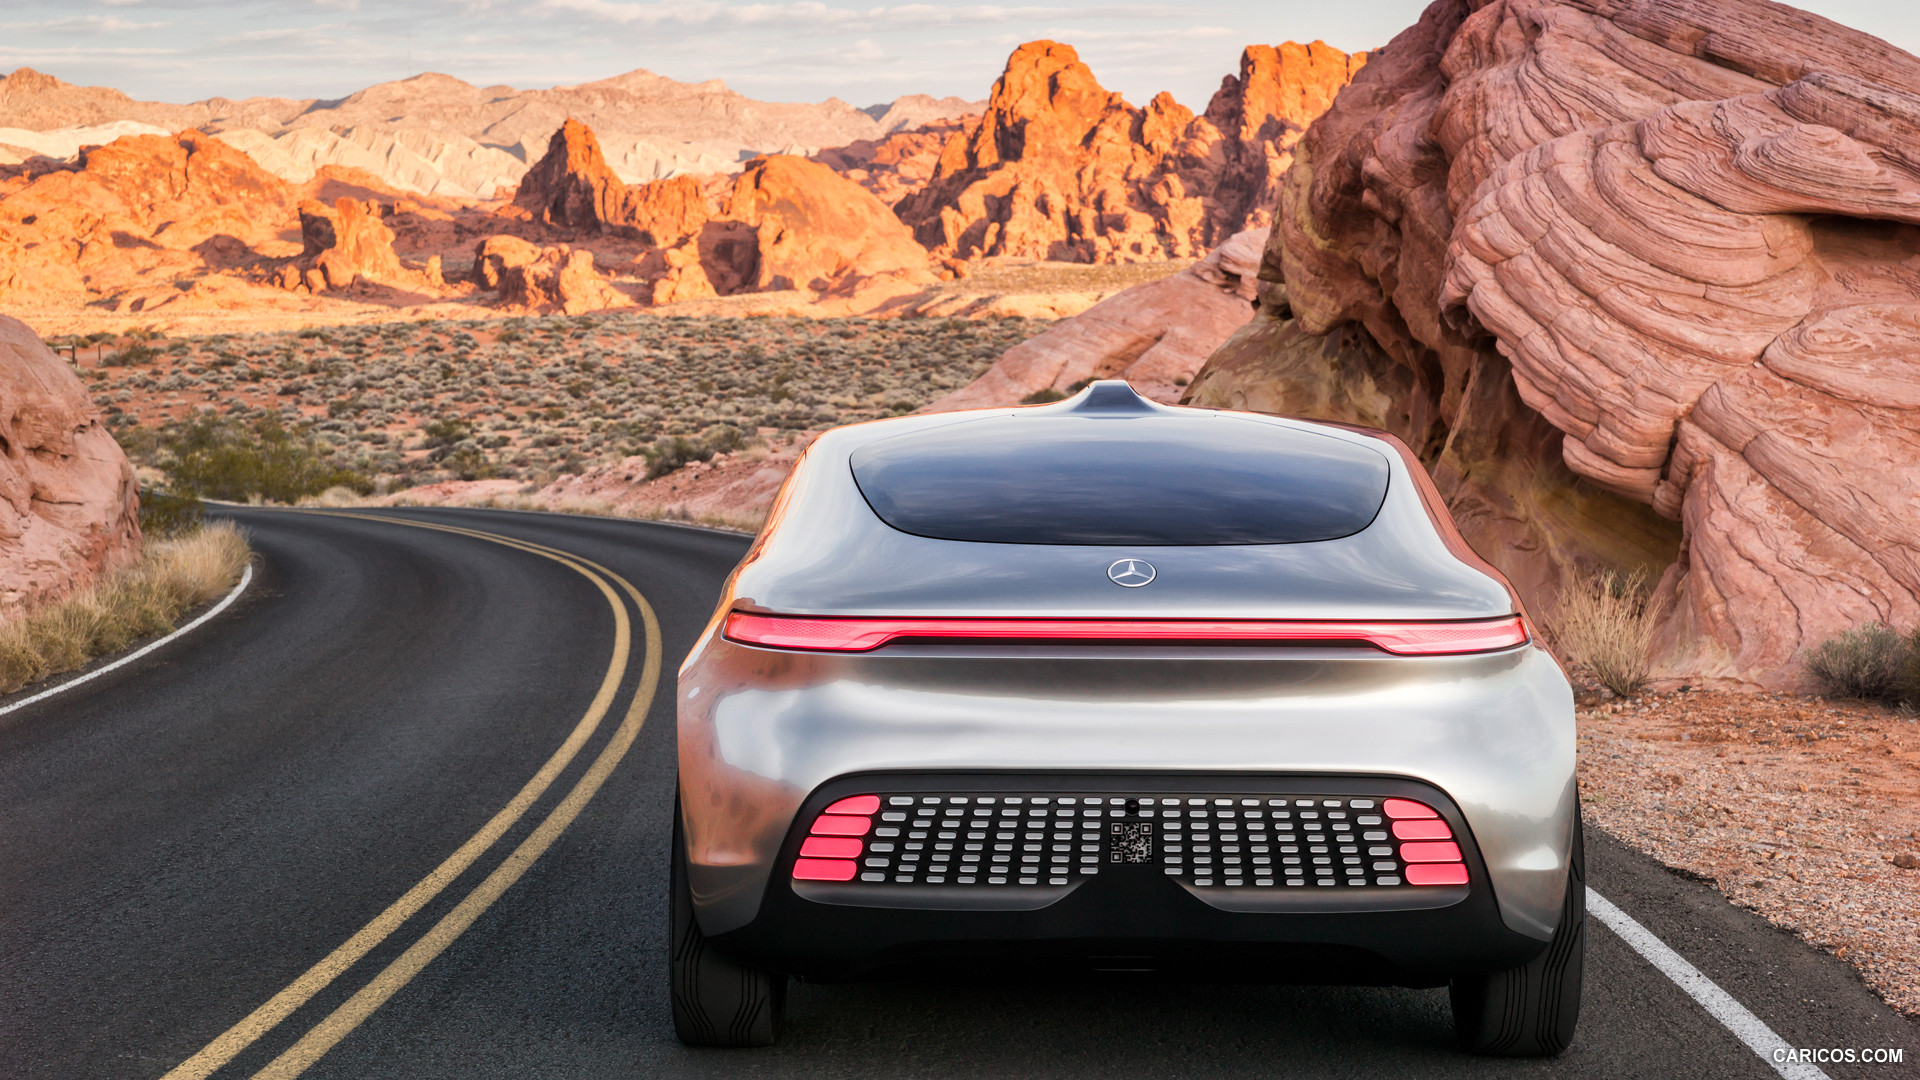 2015 Mercedes-Benz F 015 Luxury in Motion Concept  - Rear, #22 of 92